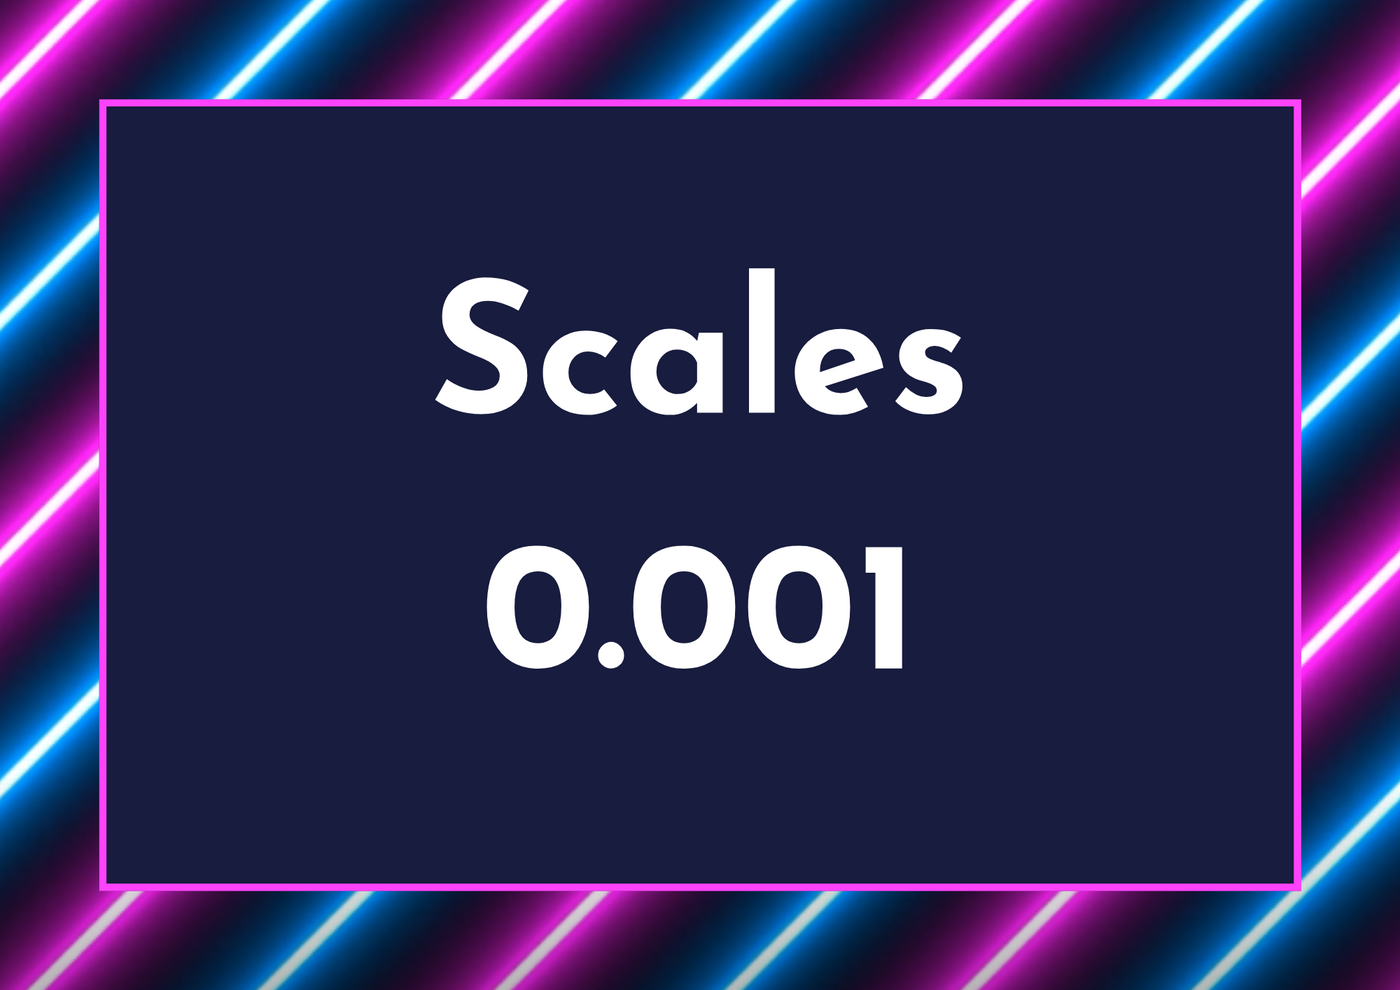 Scales 0.001